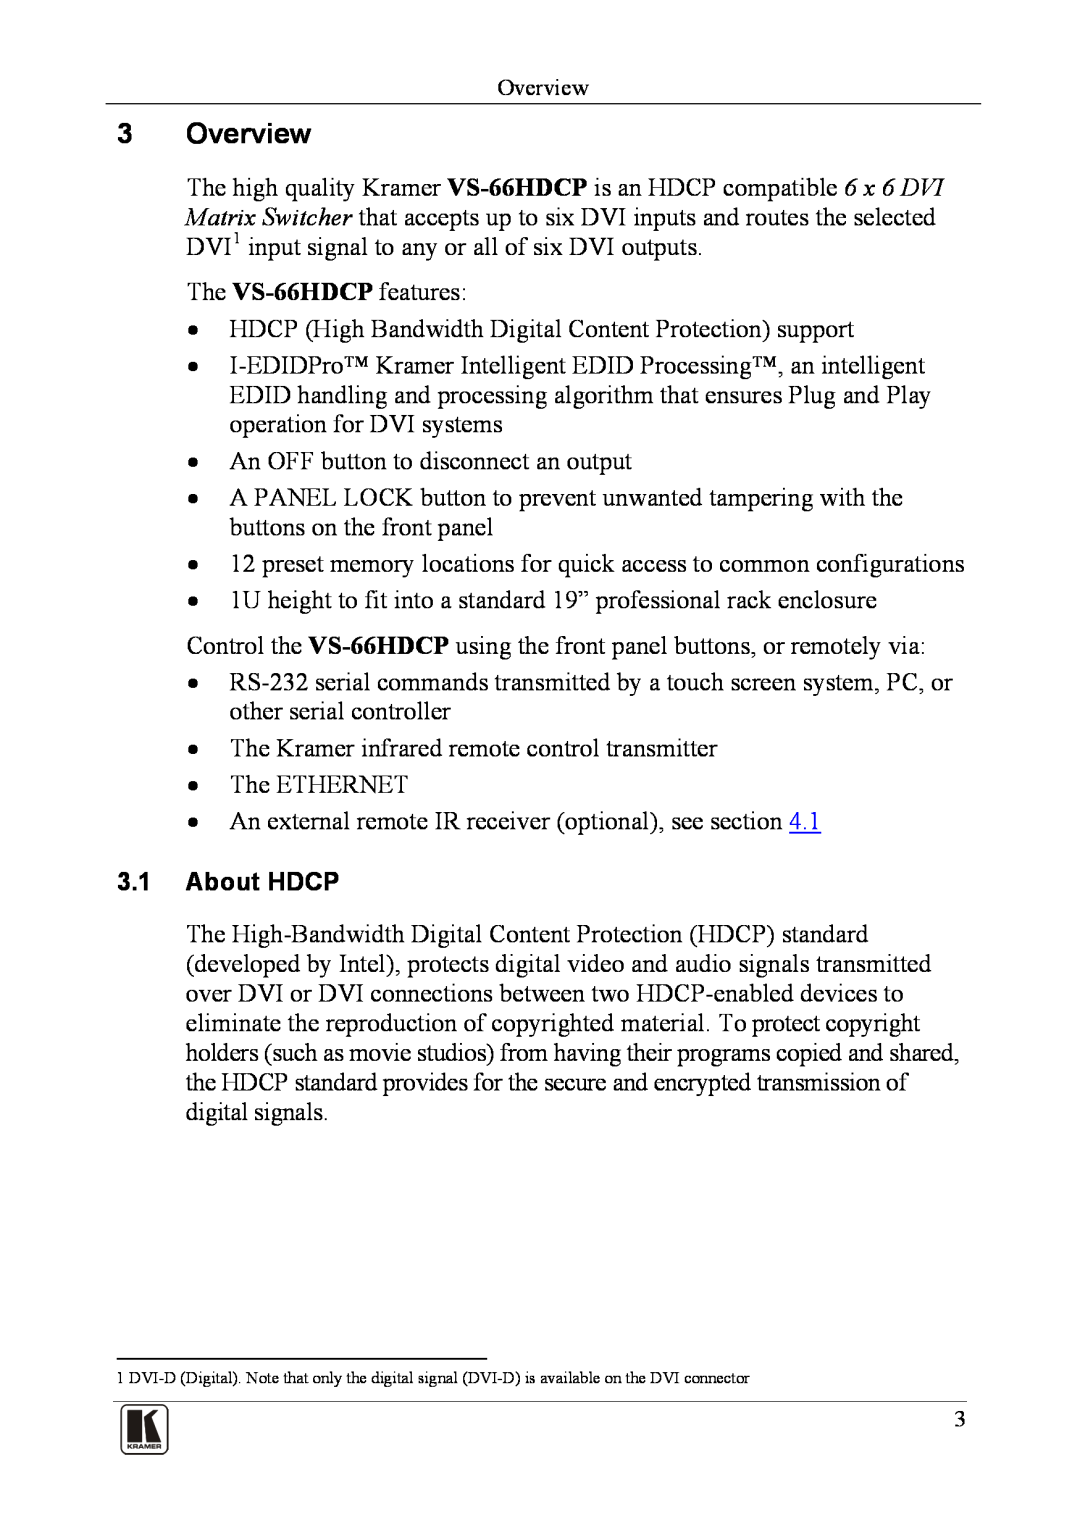 Kramer Electronics VS-66hdcp user manual Overview, About HDCP 